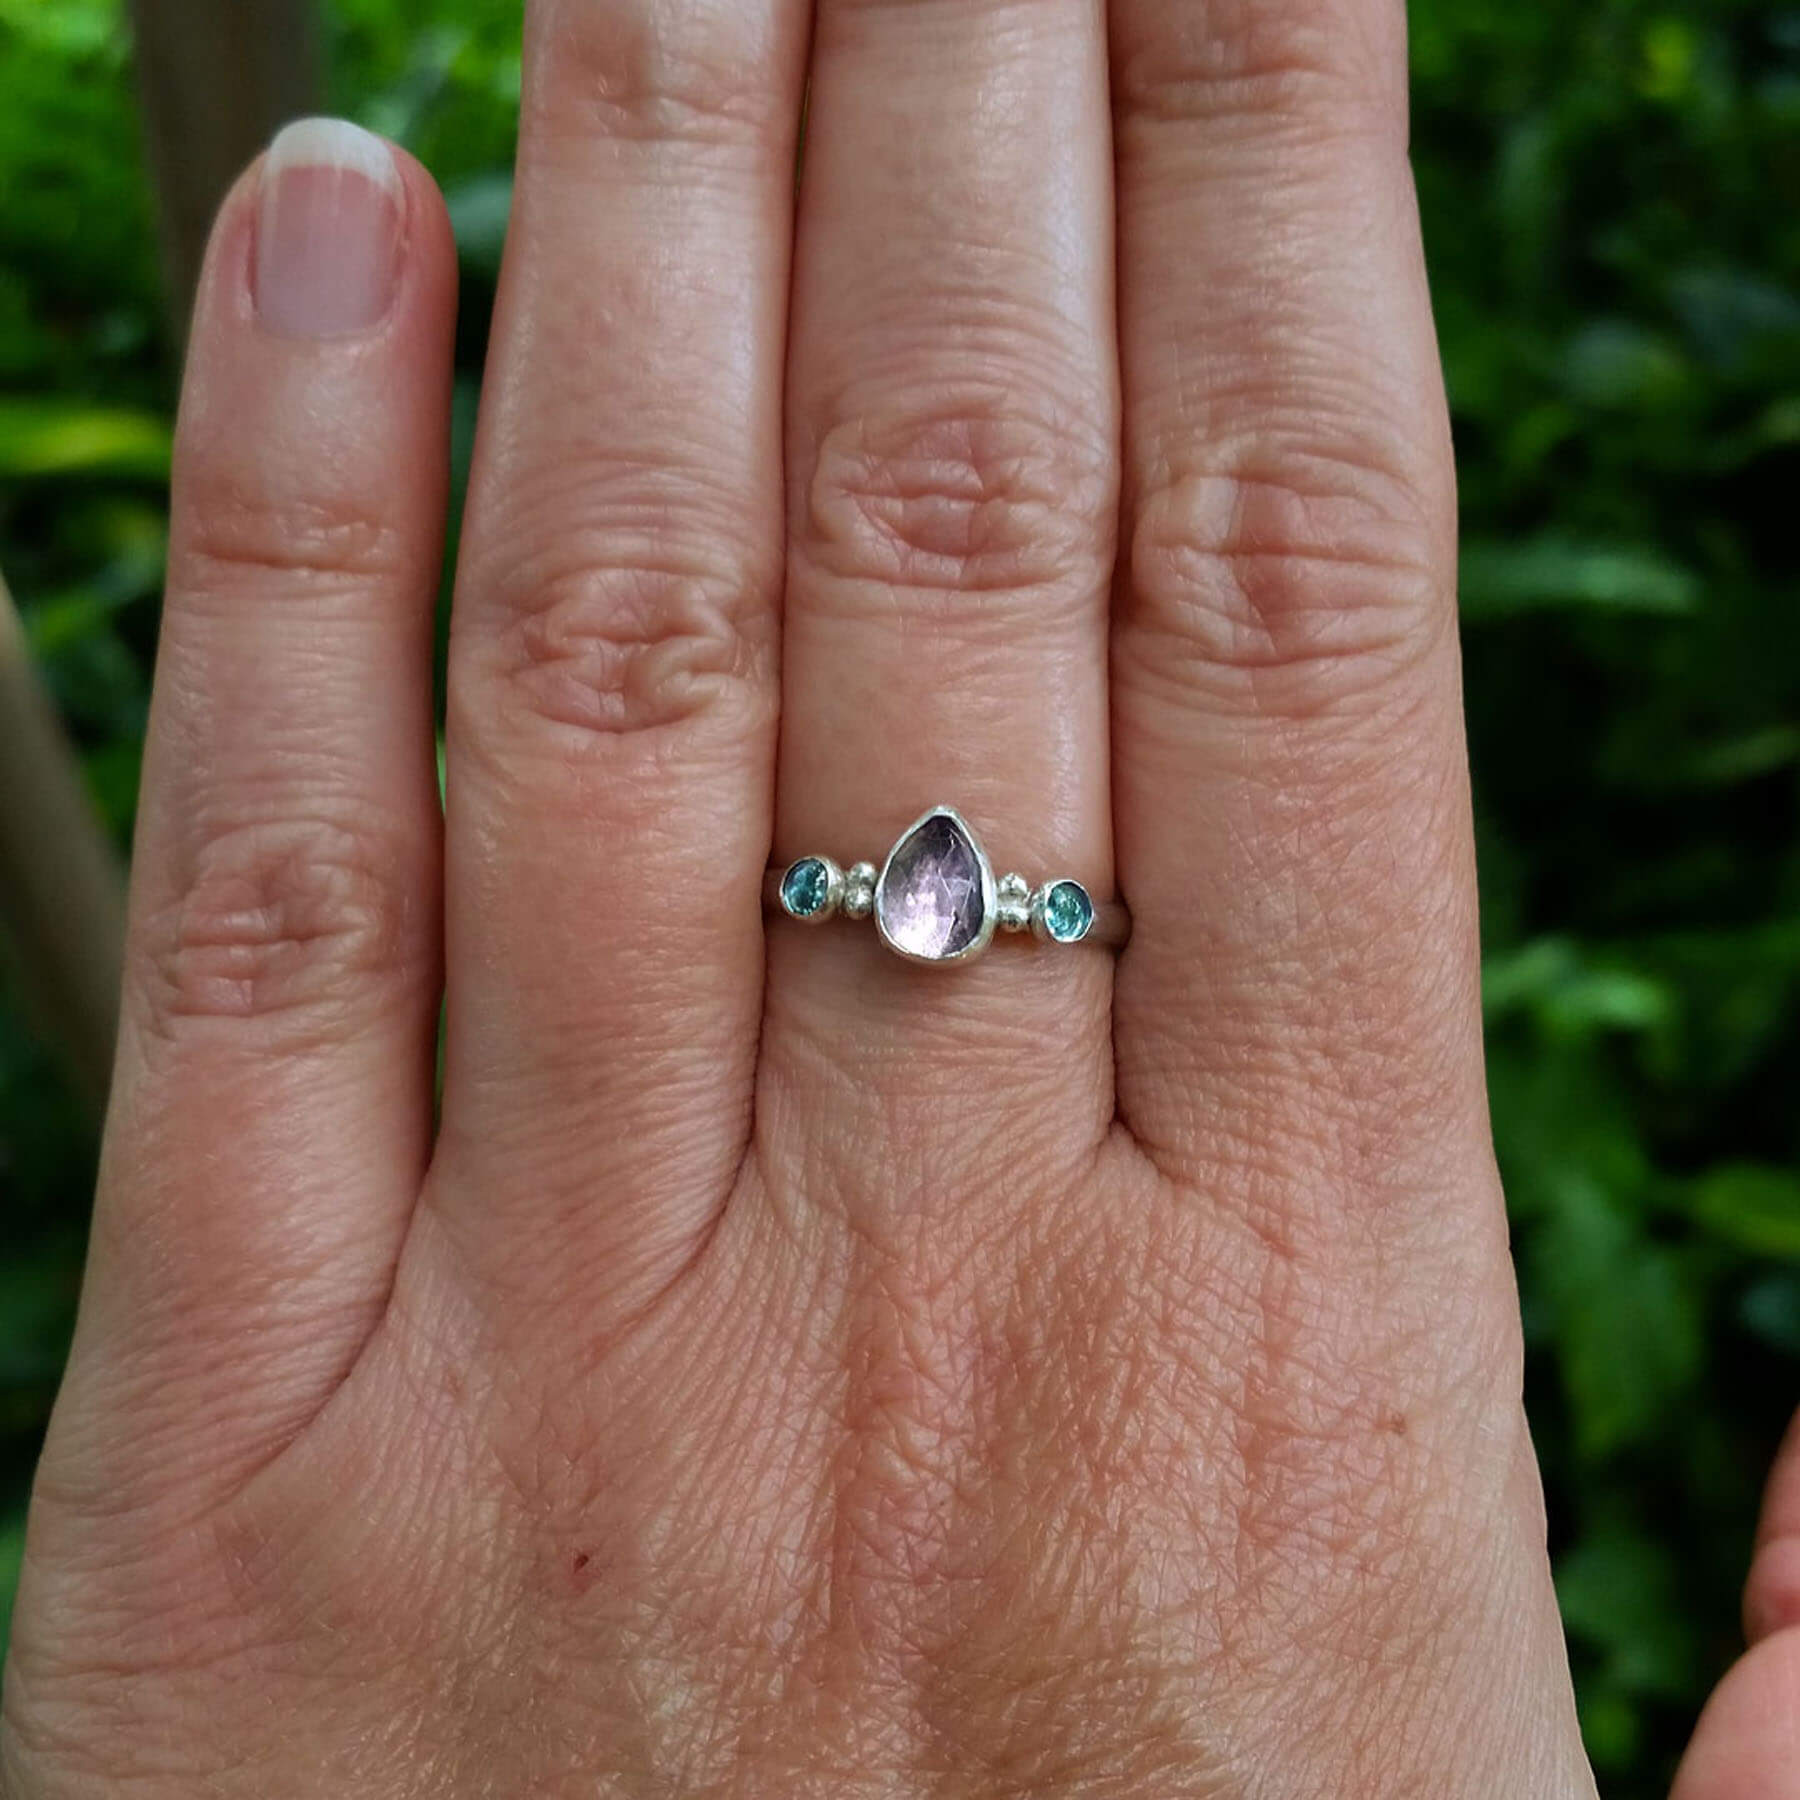 Twilight Pear-shaped Amethyst and Blue Topaz Ring - Size 8